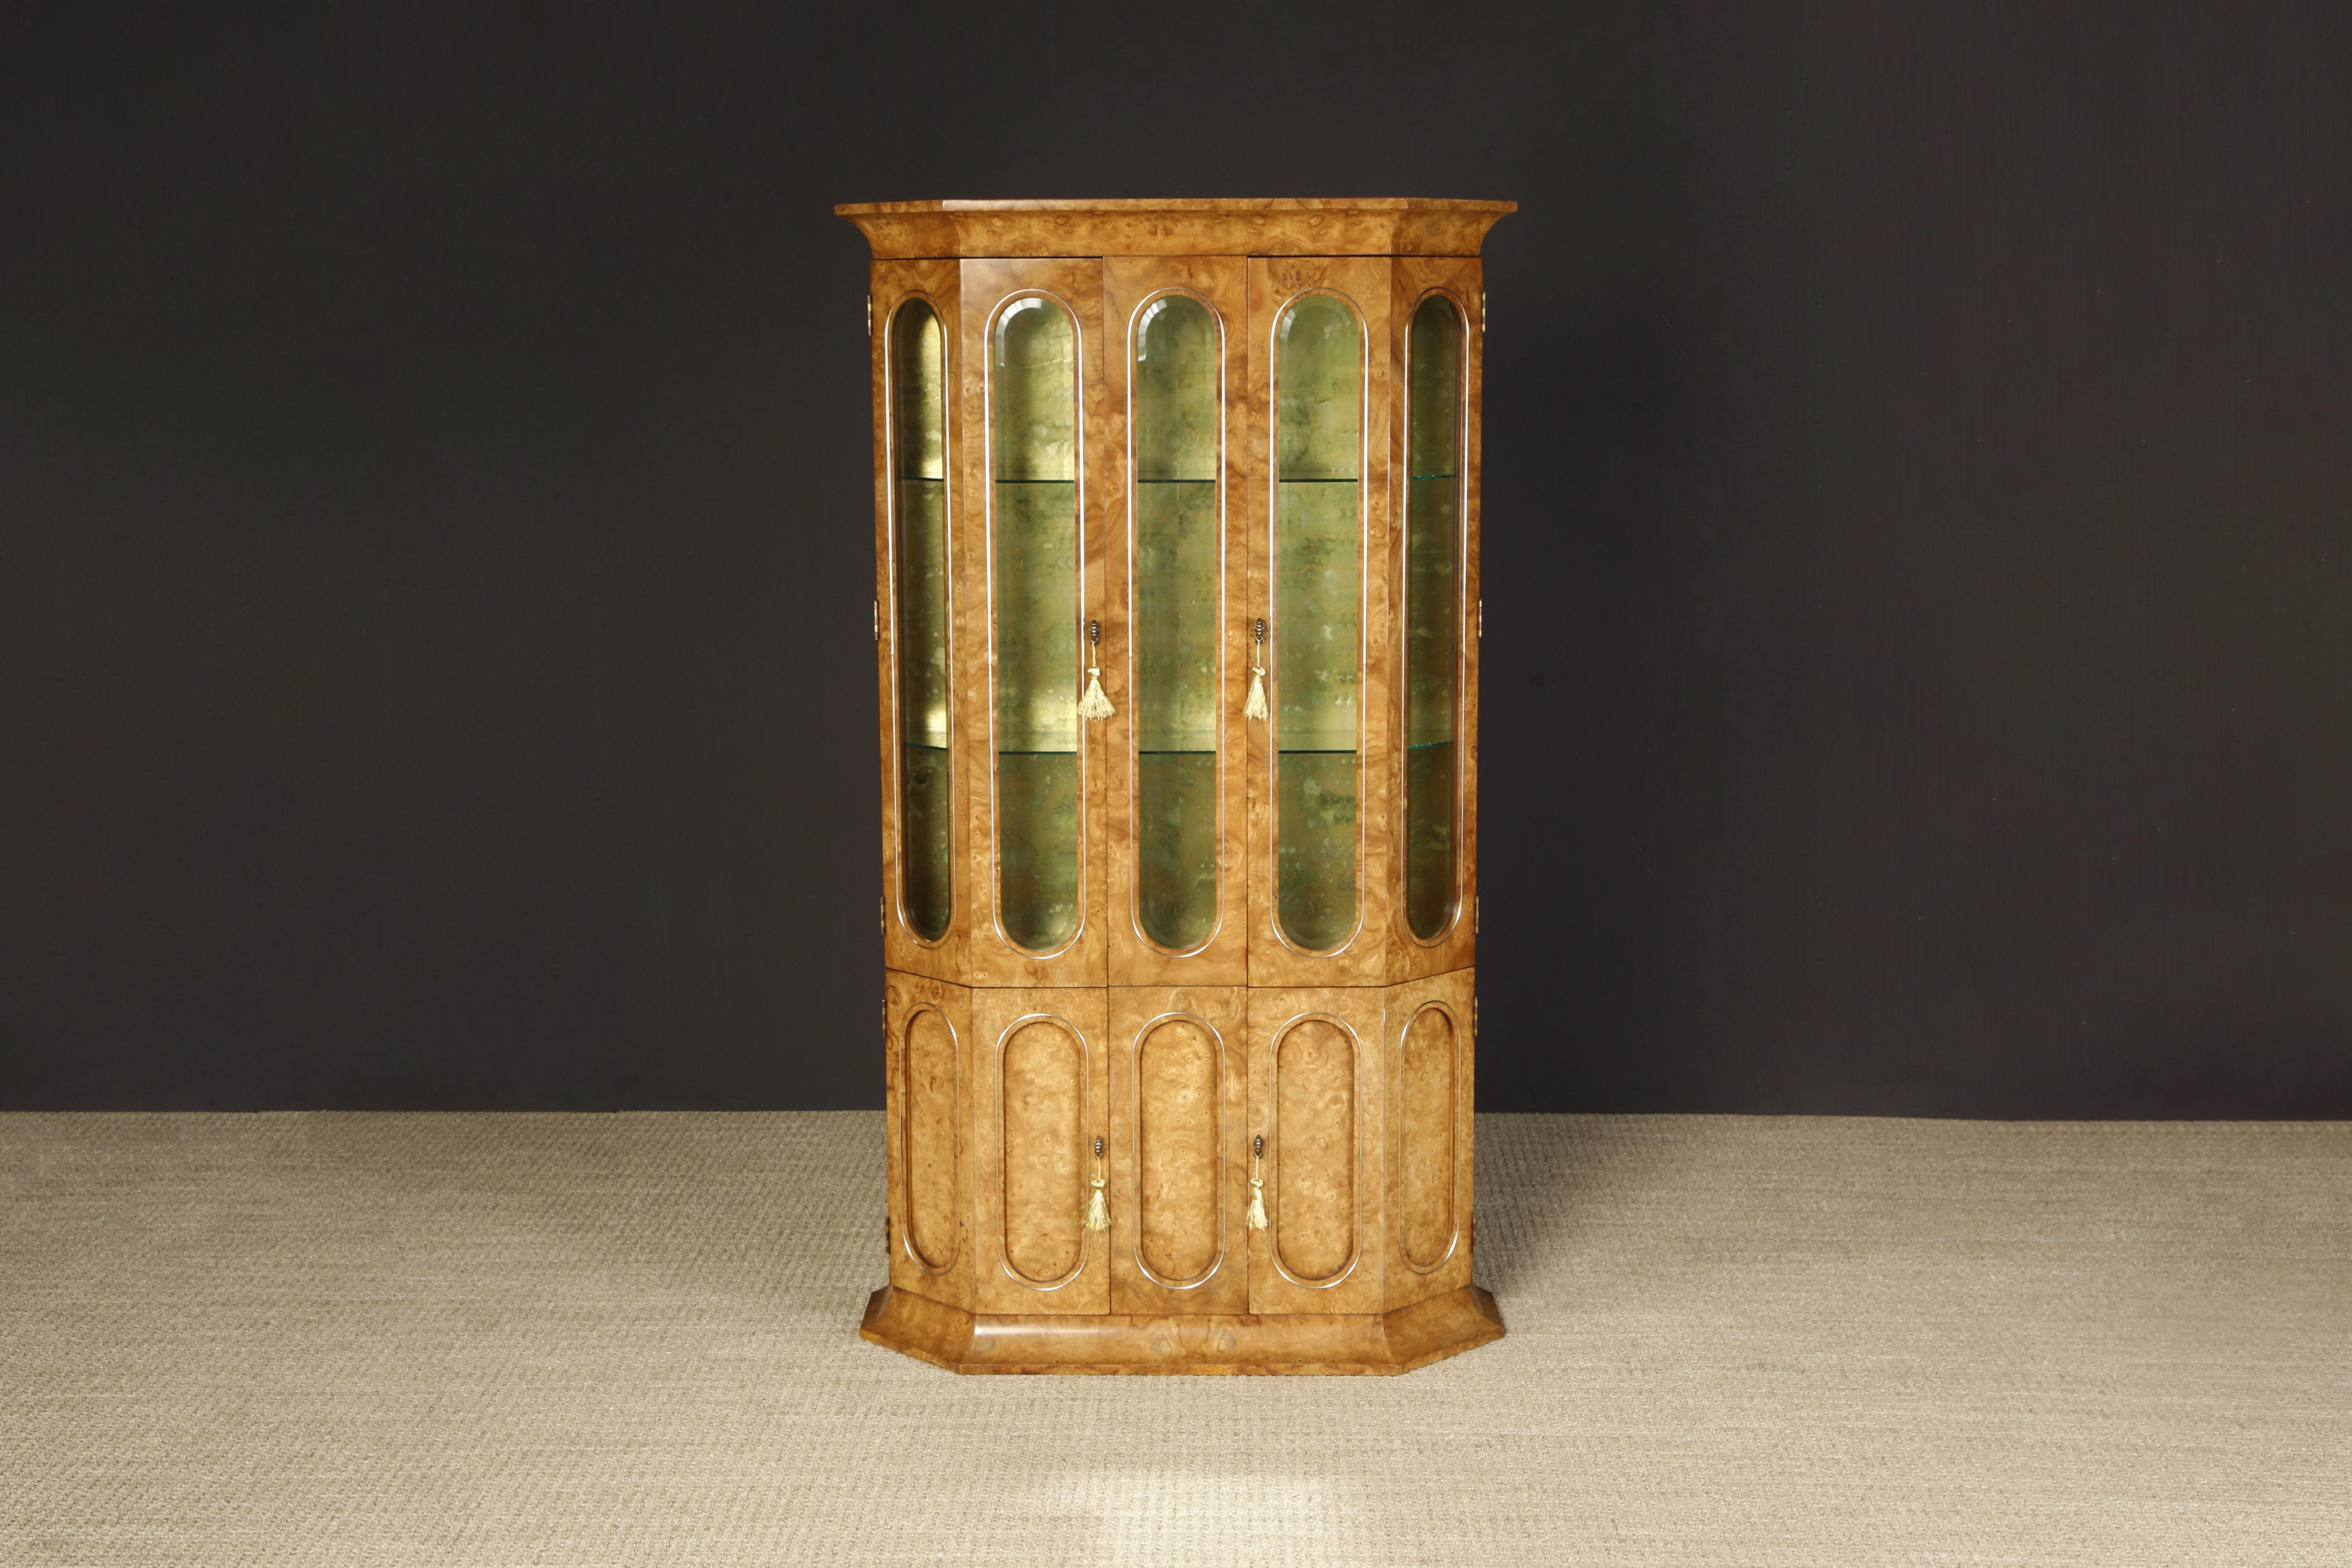 This incredible burled wood display cabinet, produced by Mastercraft in the 1970s, features incredibly exotic grained burl with arched glass display windows, illuminated interior, exquisite antiqued interior, and interior glass shelves which are